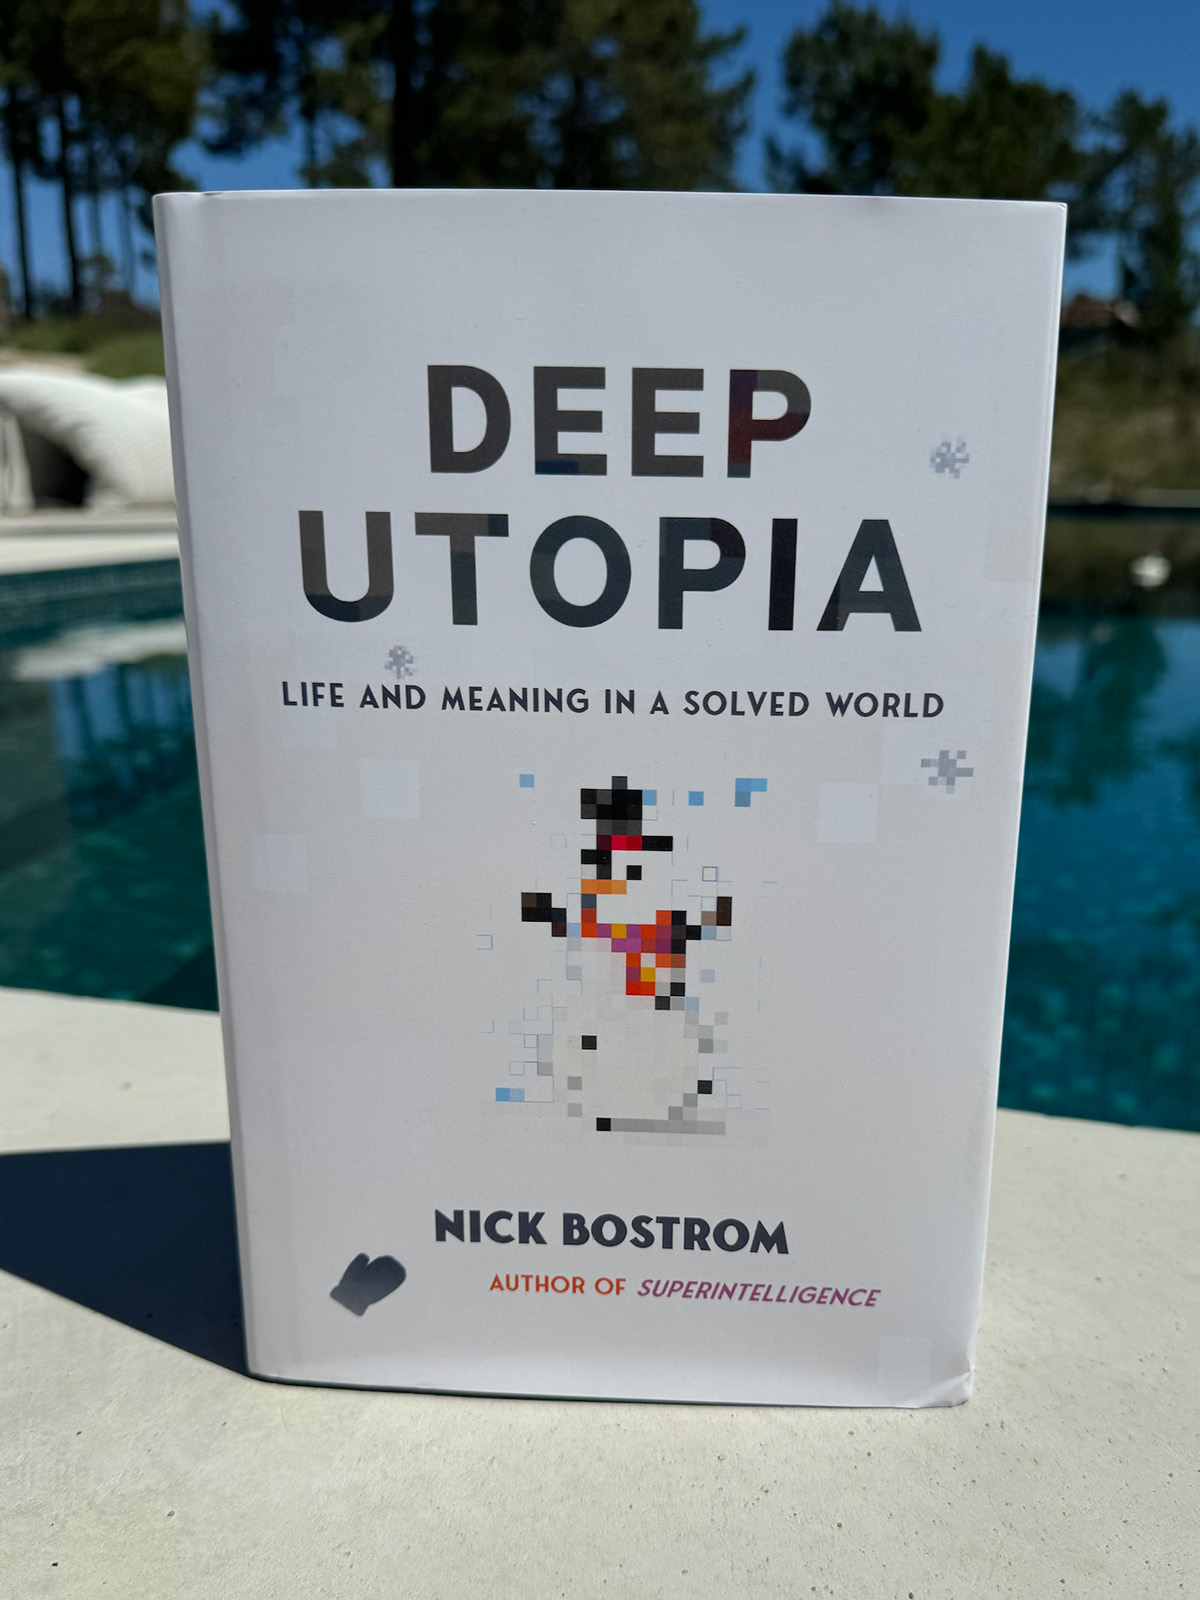 Photo of Deep Utopia by Nick Bostrom at a poolside